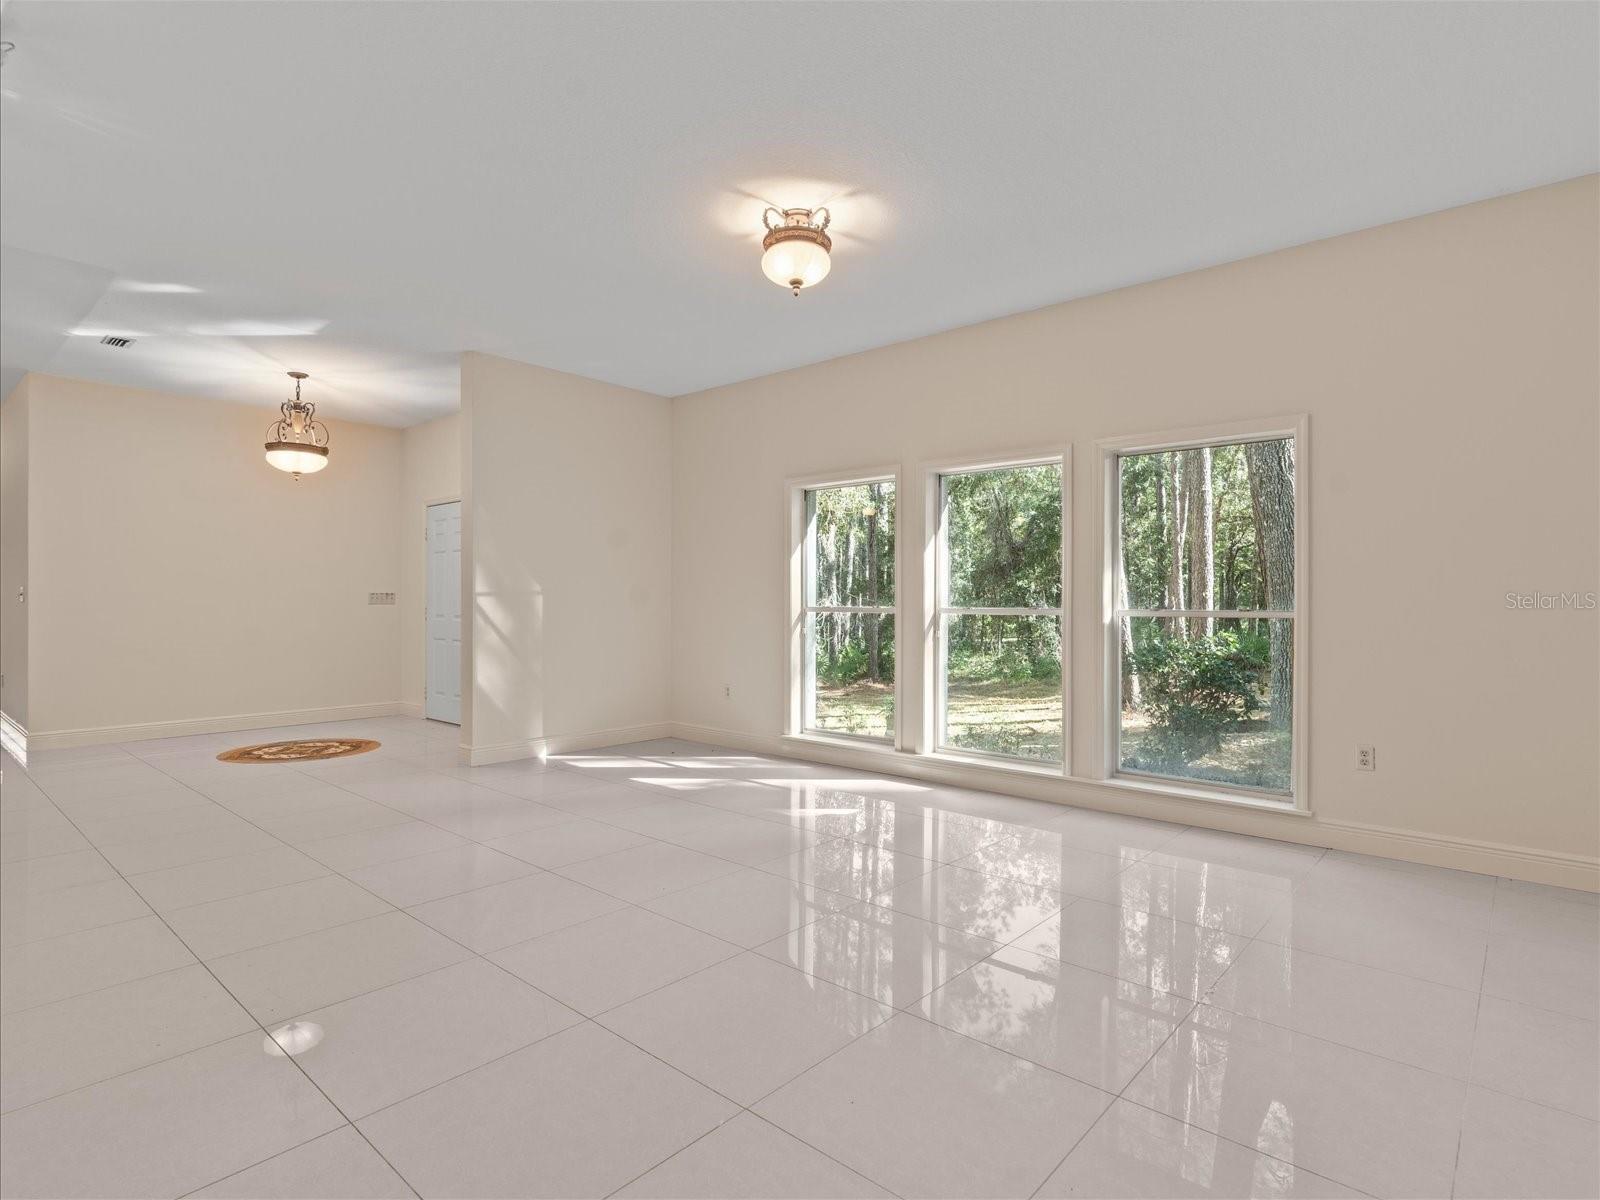 Formal Dining Room with elegant flooring and natural light streaming from the front